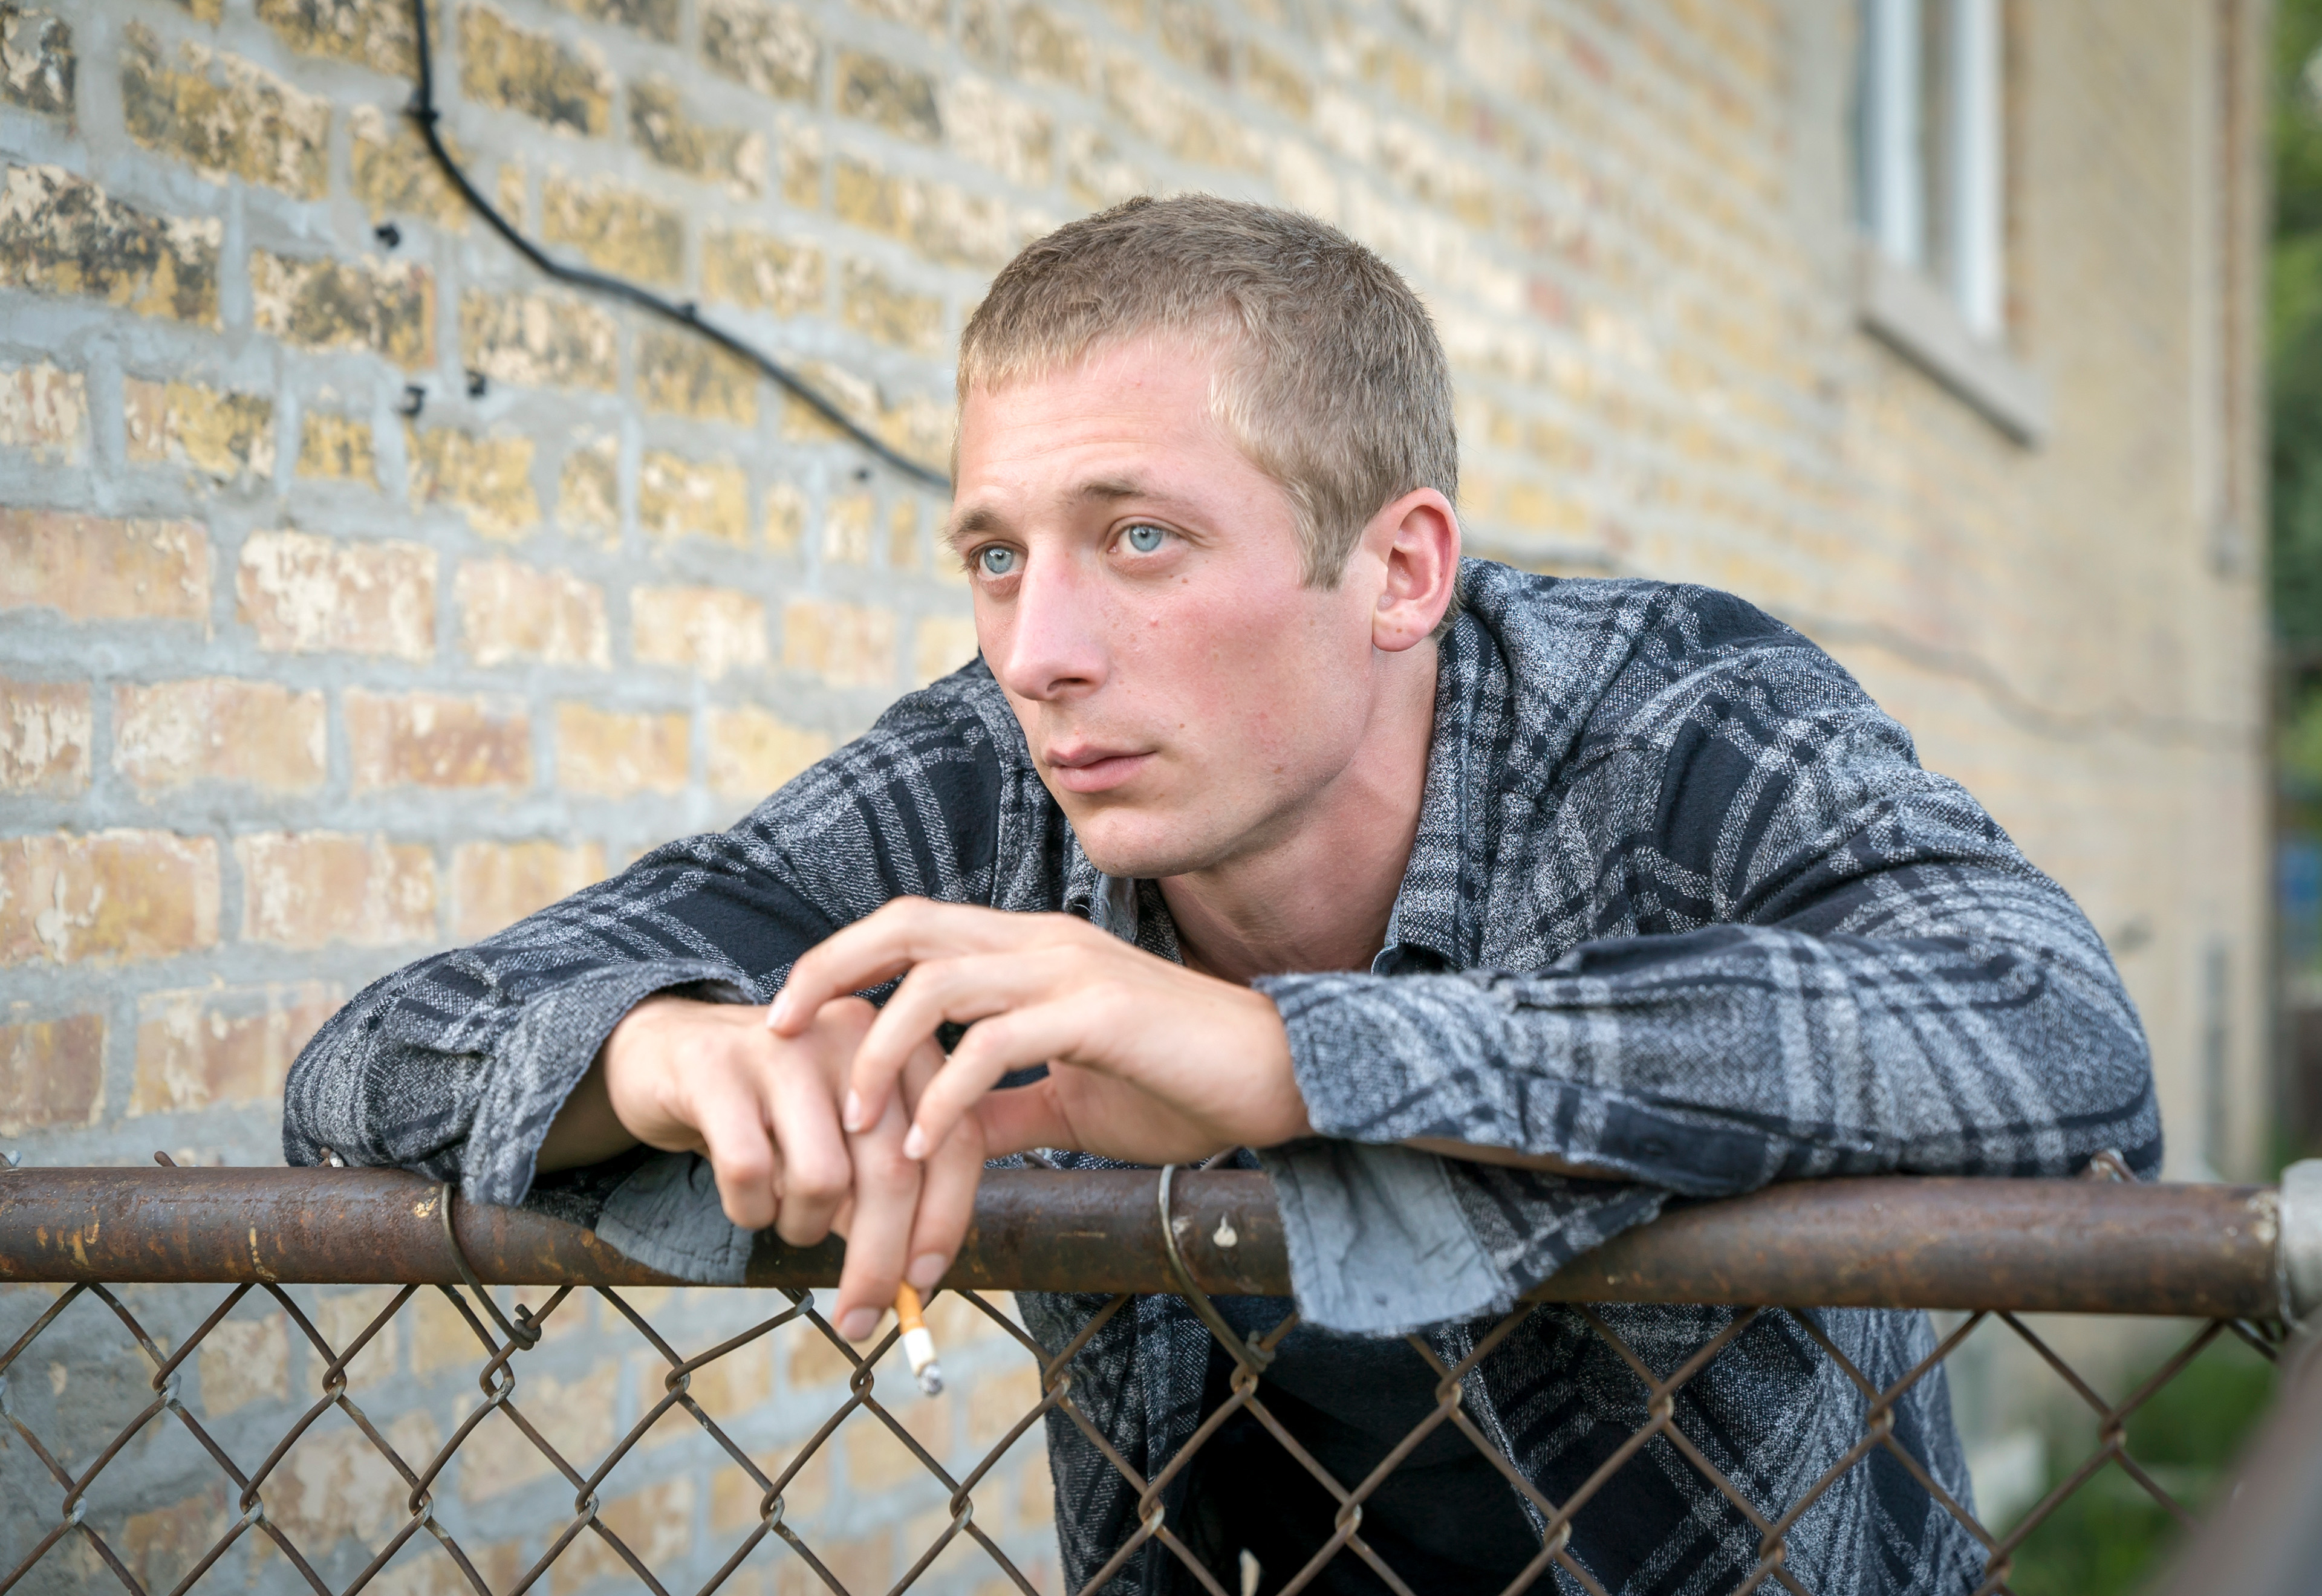 Man resting arms on a fence looking thoughtful. He&#x27;s wearing a patterned shirt. Used for a TV show article